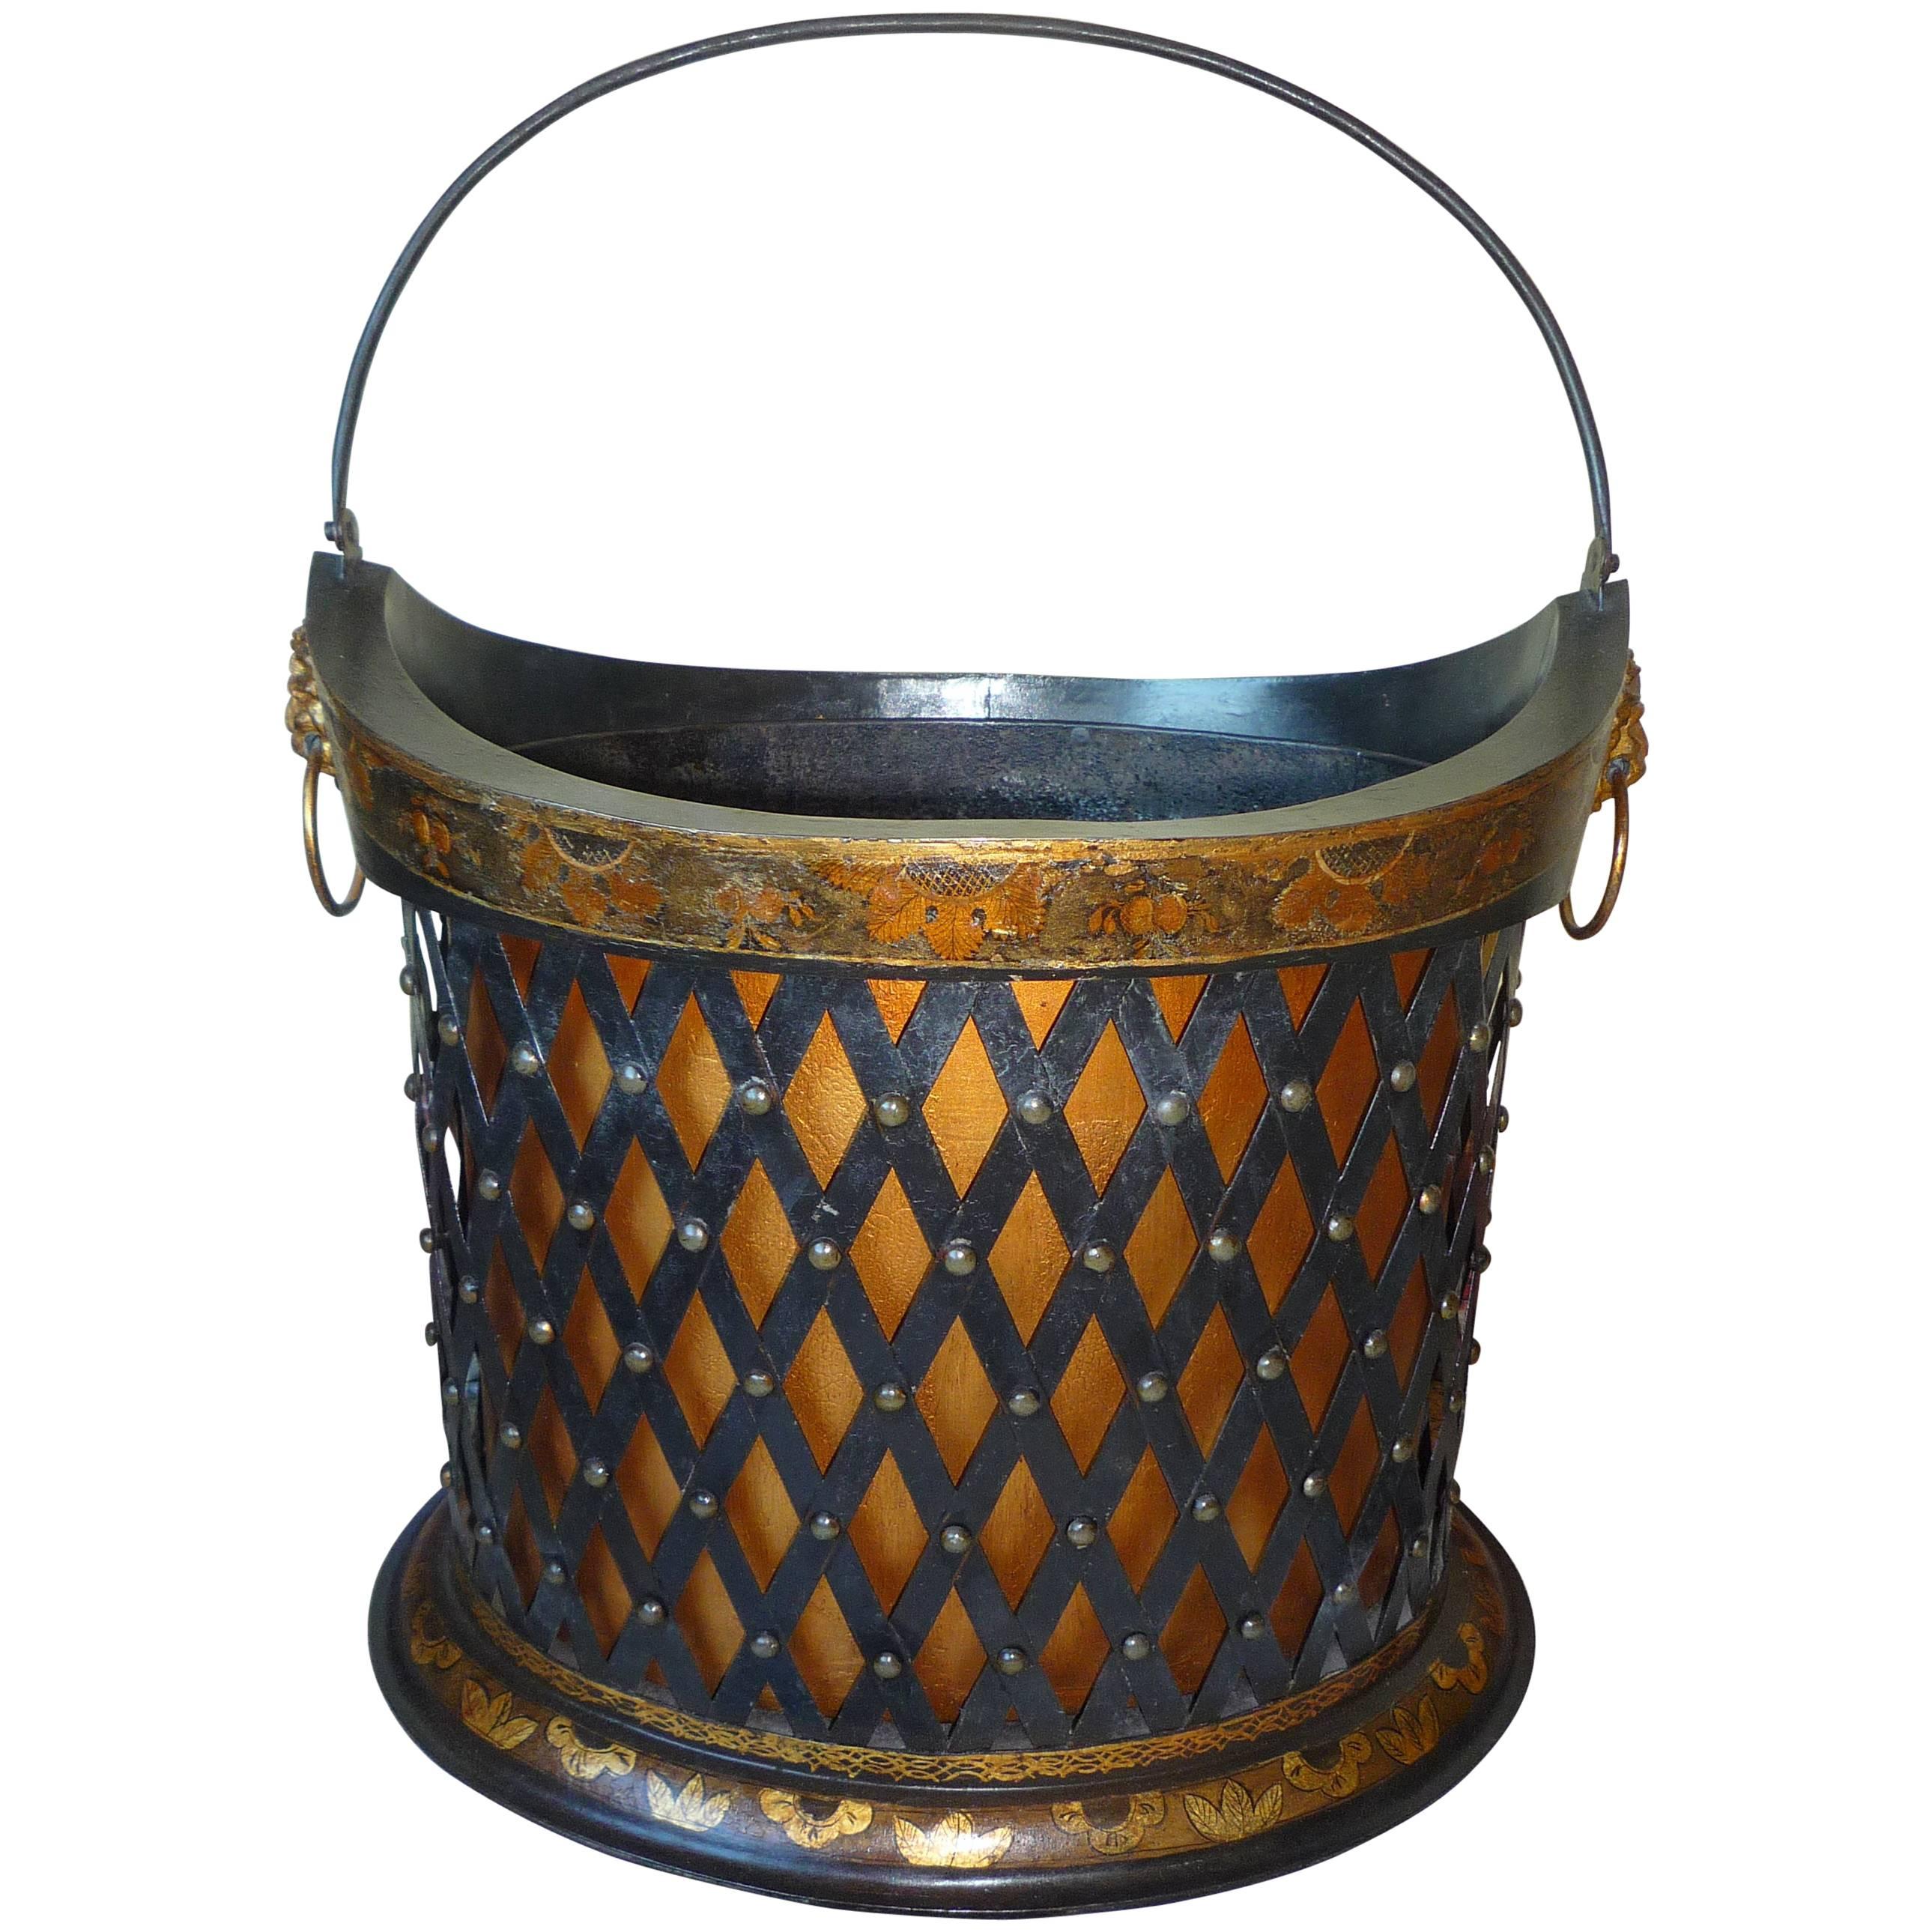 English Regency Period Painted and Gilt Tole Basket, circa 1810-1820